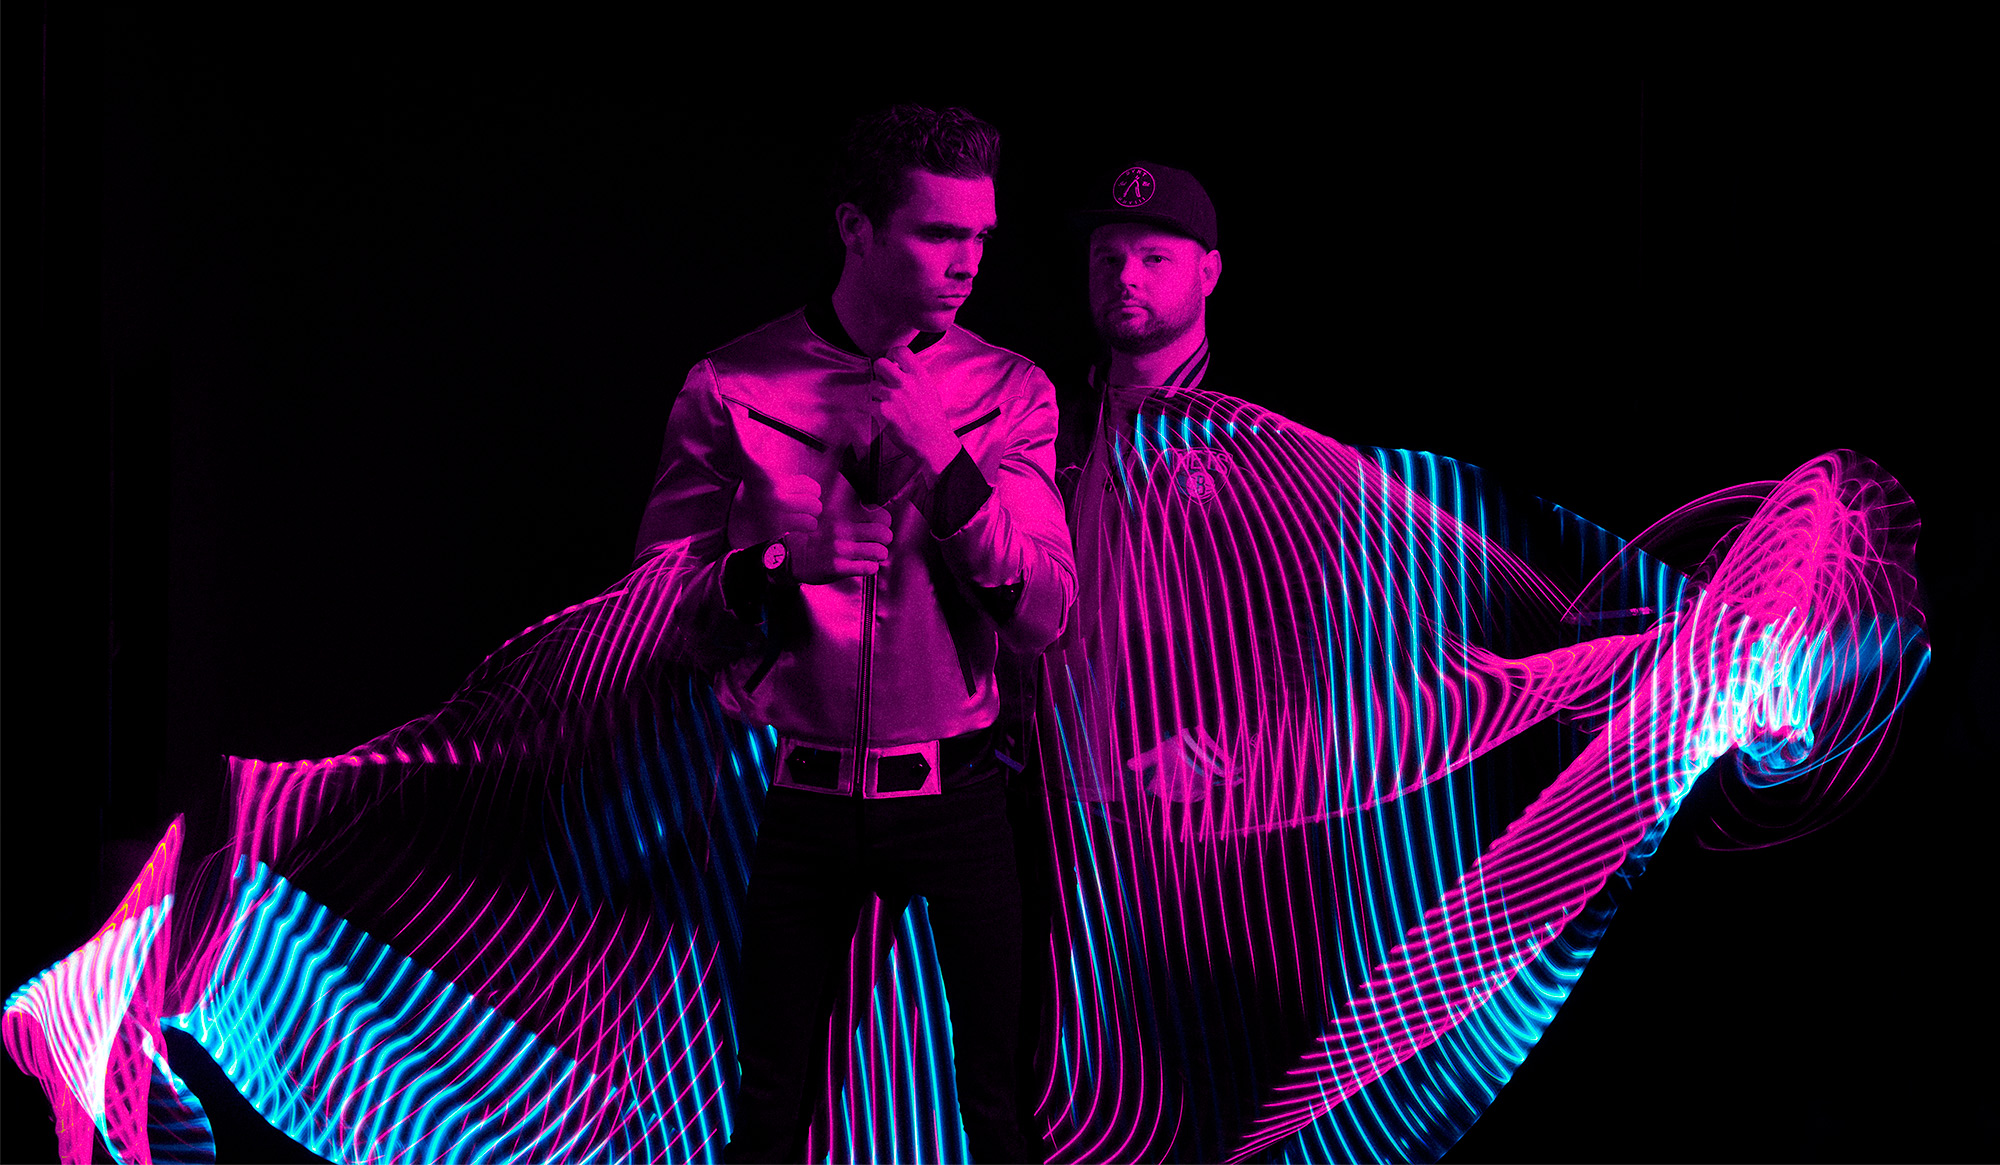 HD desktop wallpaper featuring two members of Royal Blood with dynamic neon light trails on a dark background